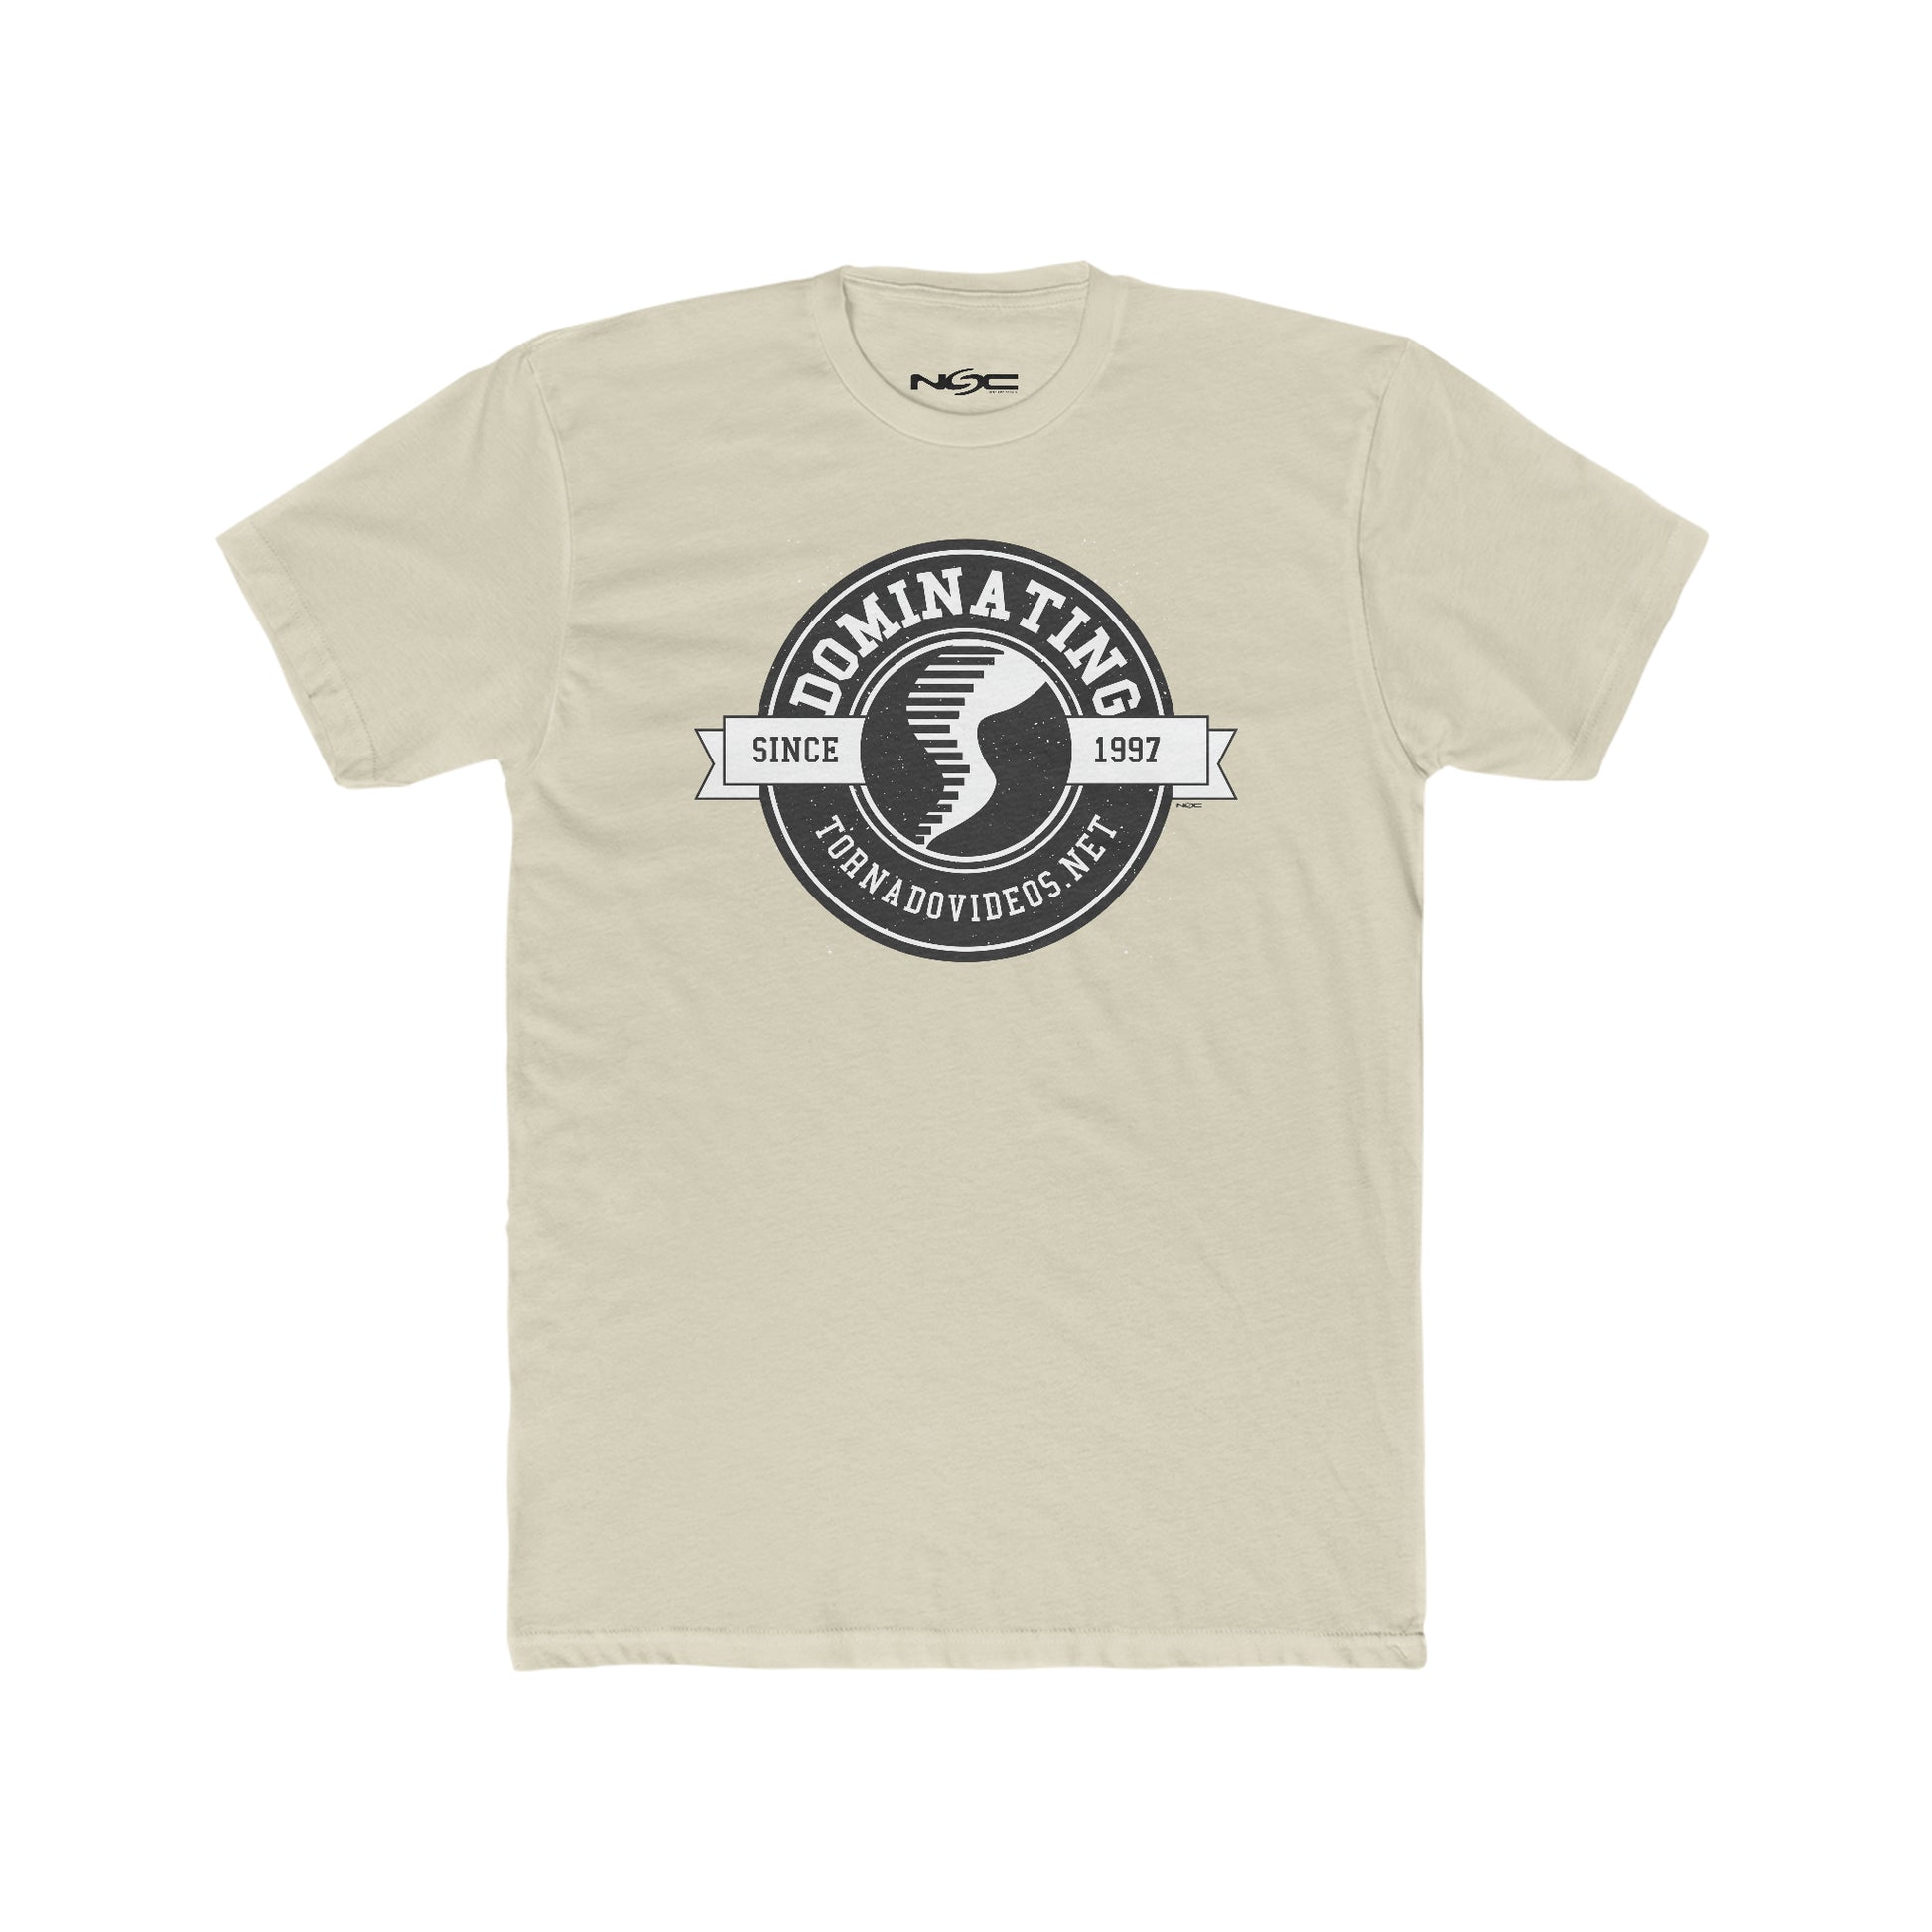 Dominating Since 1997 Vintage Tee - Never Stop Chasing